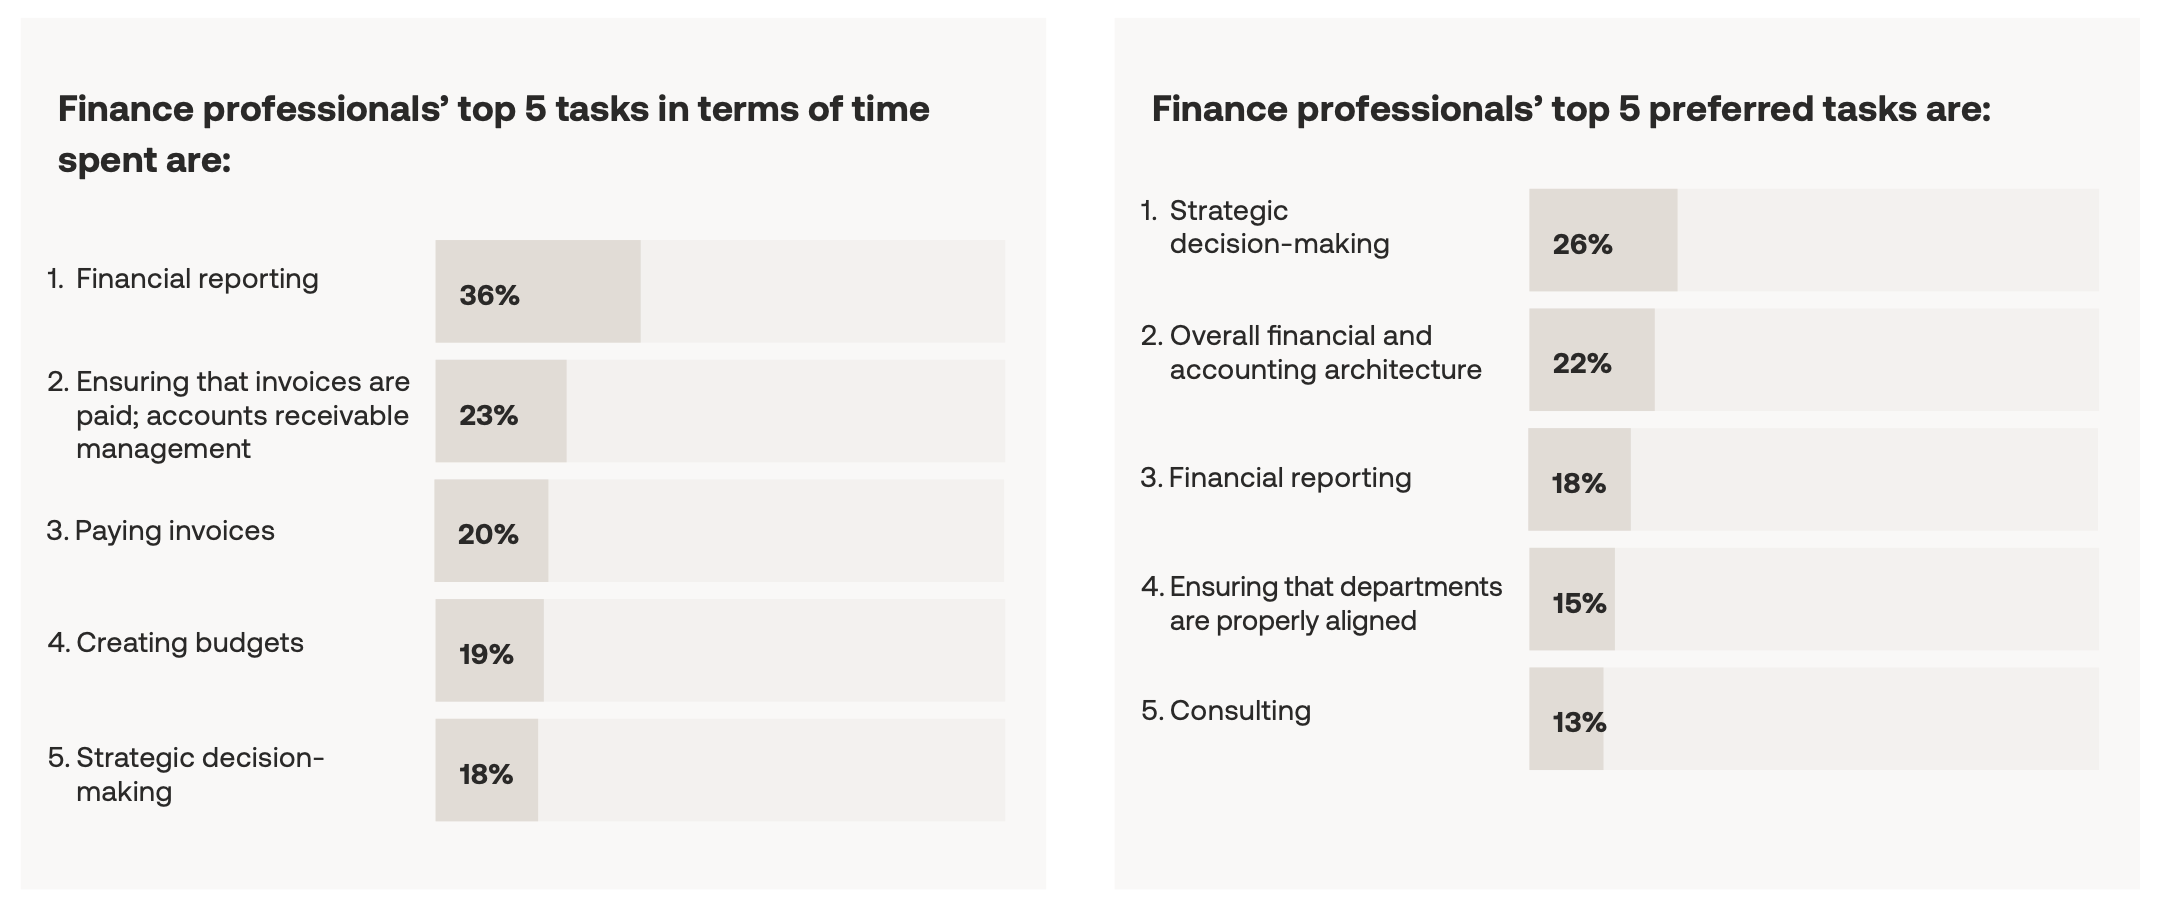 Survey responses for finance professionals' top 5 tasks in terms of time spent and preference.